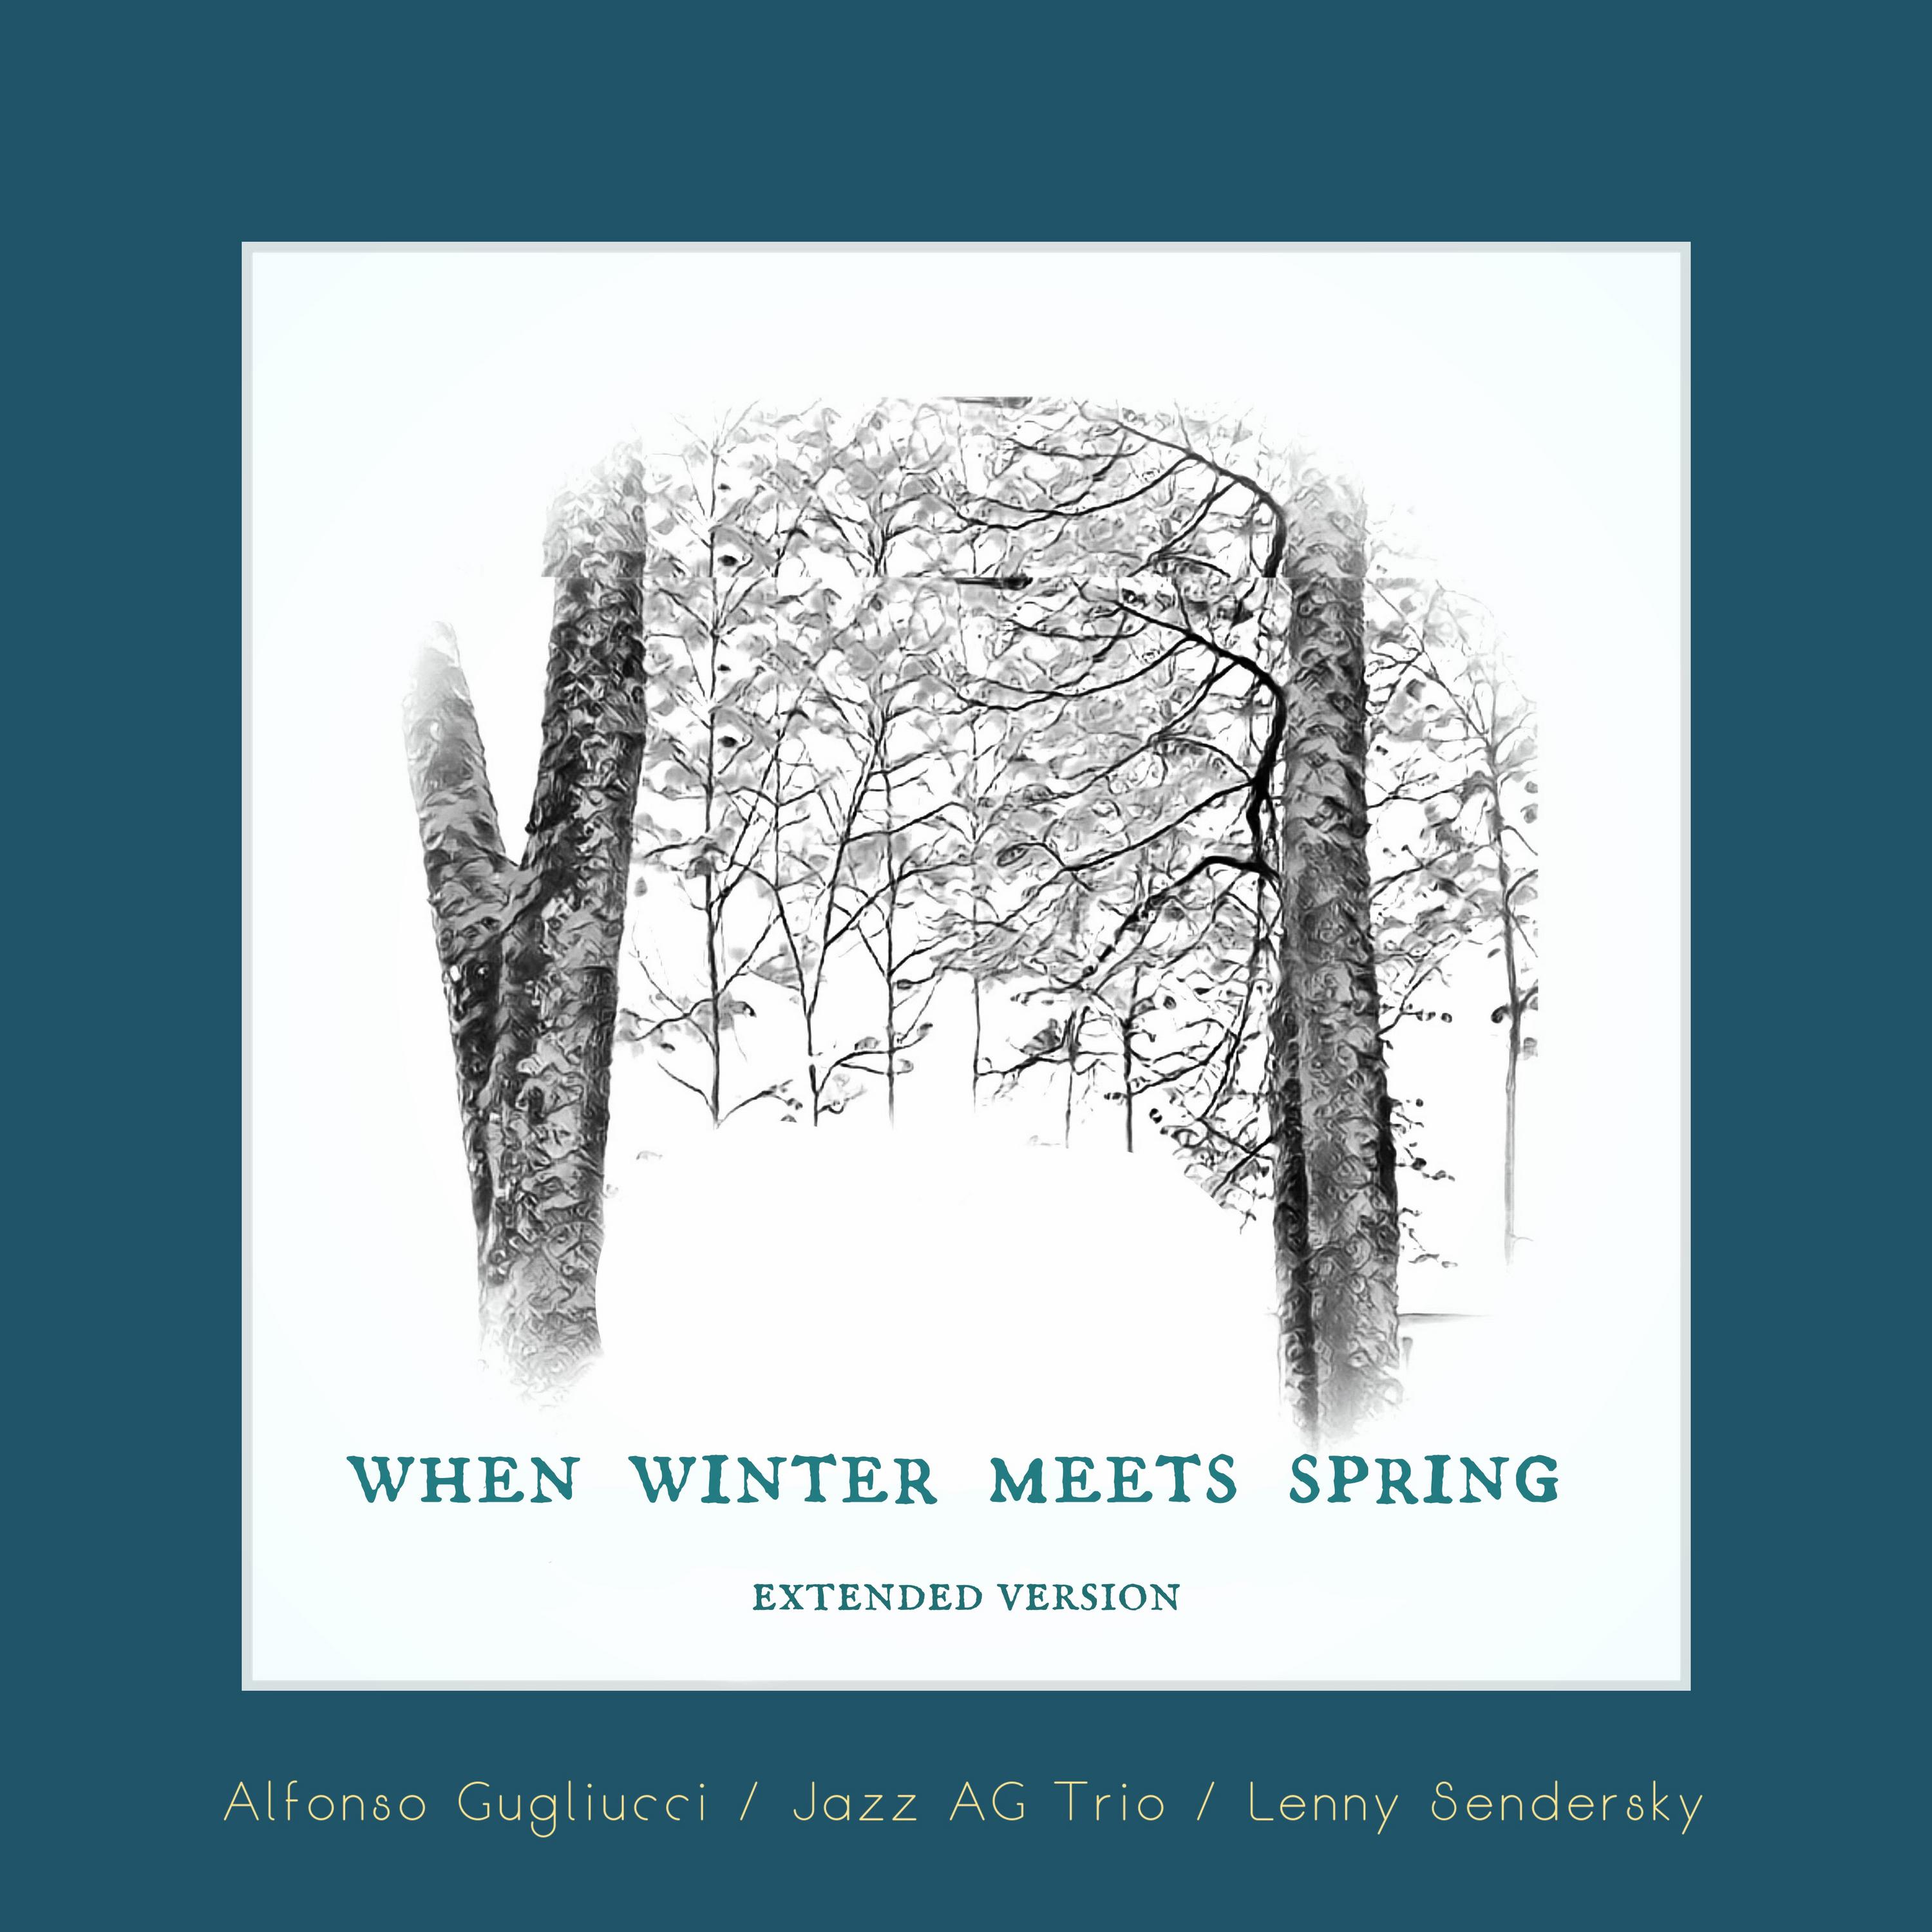 Alfonso Gugliucci - When Winter Meets Spring (Extended Version)